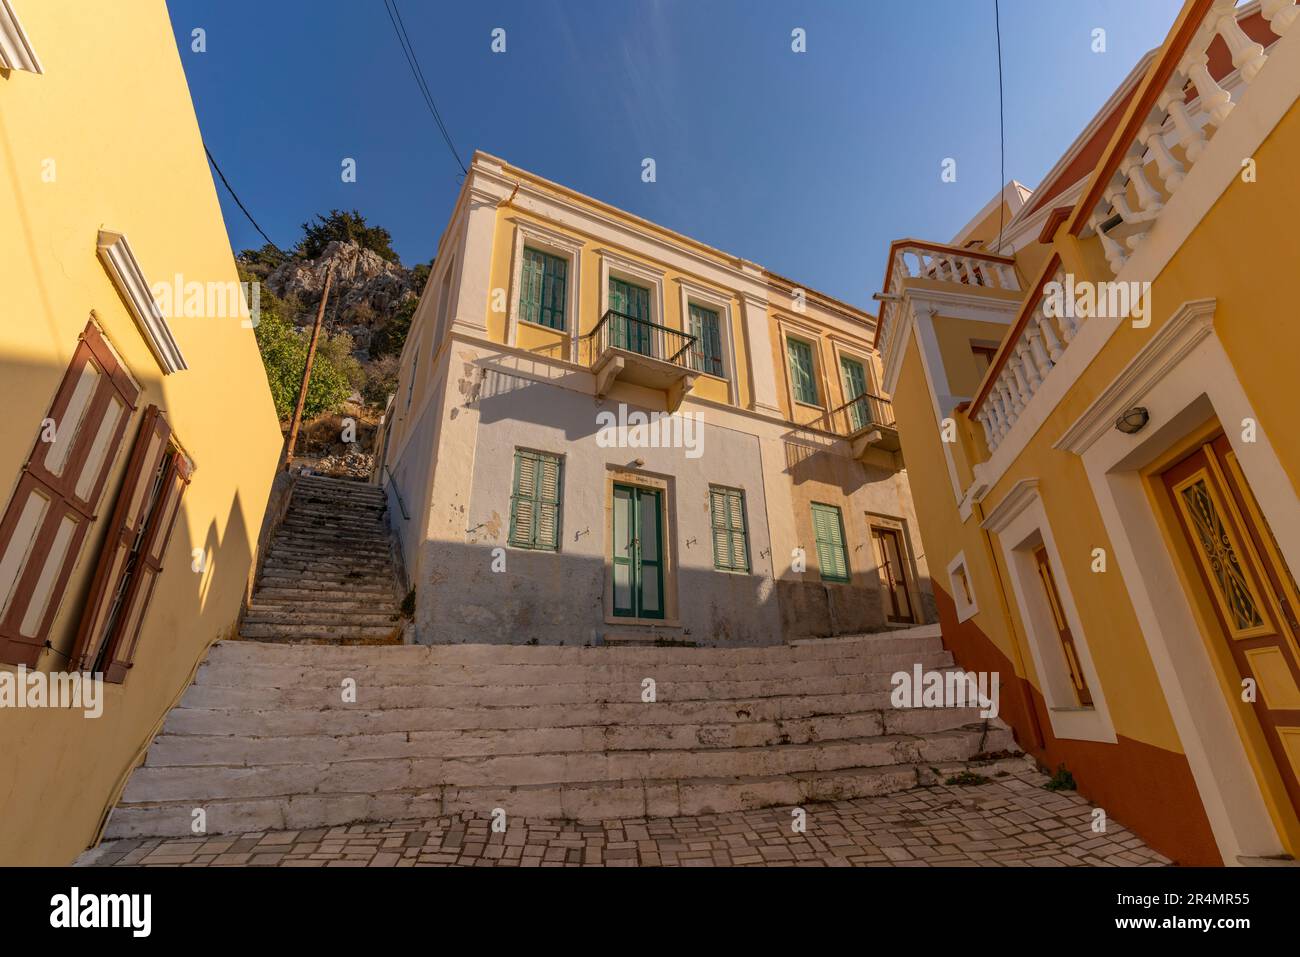 View of buildings in Symi Town, Symi Island, Dodecanese, Greek Islands, Greece, Europe Stock Photo